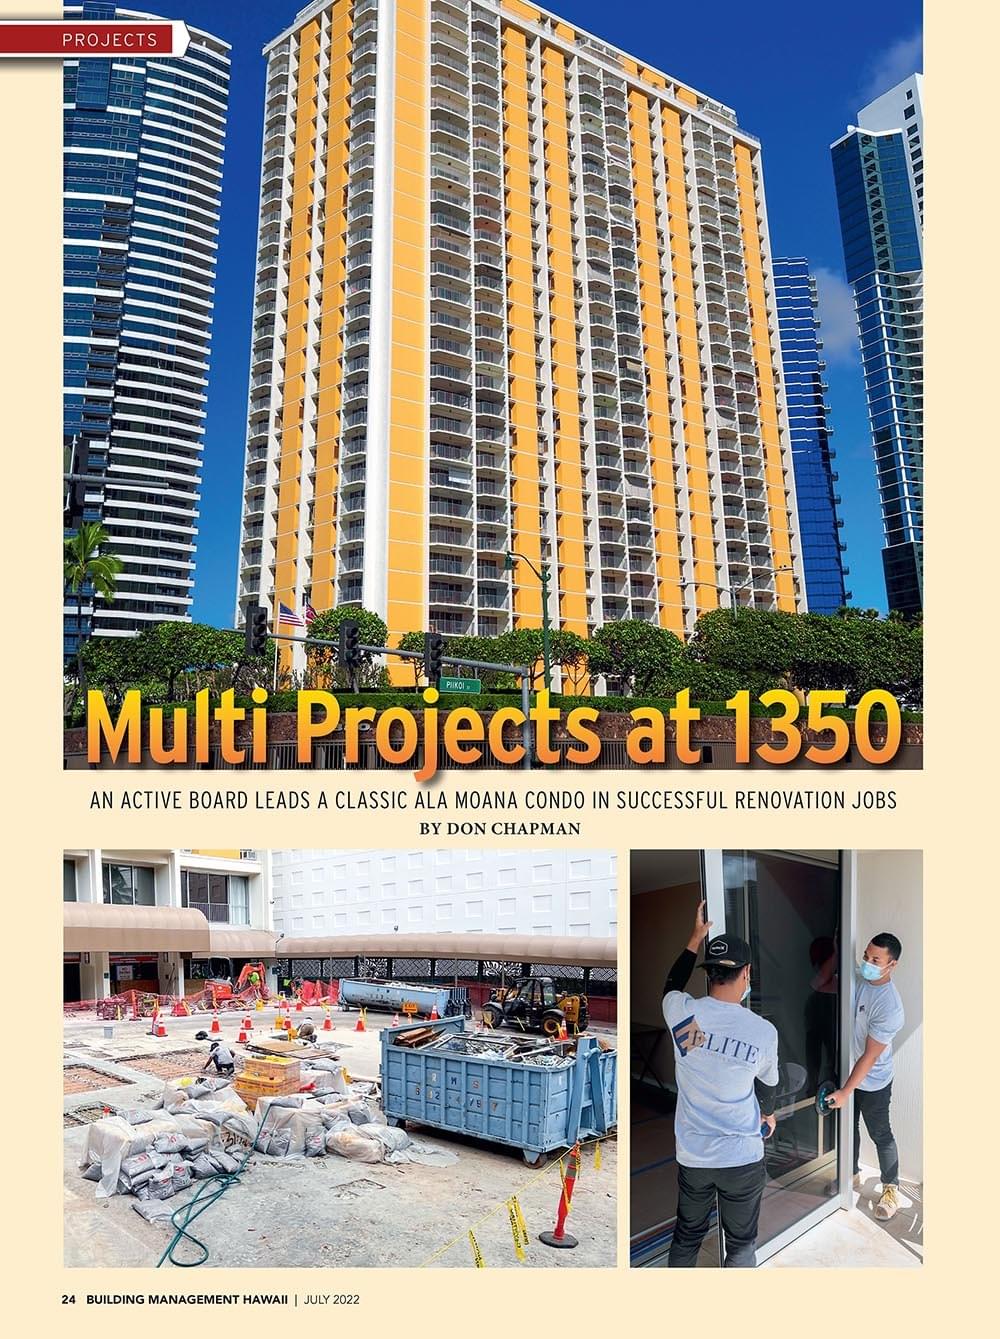 1350 Projects Article